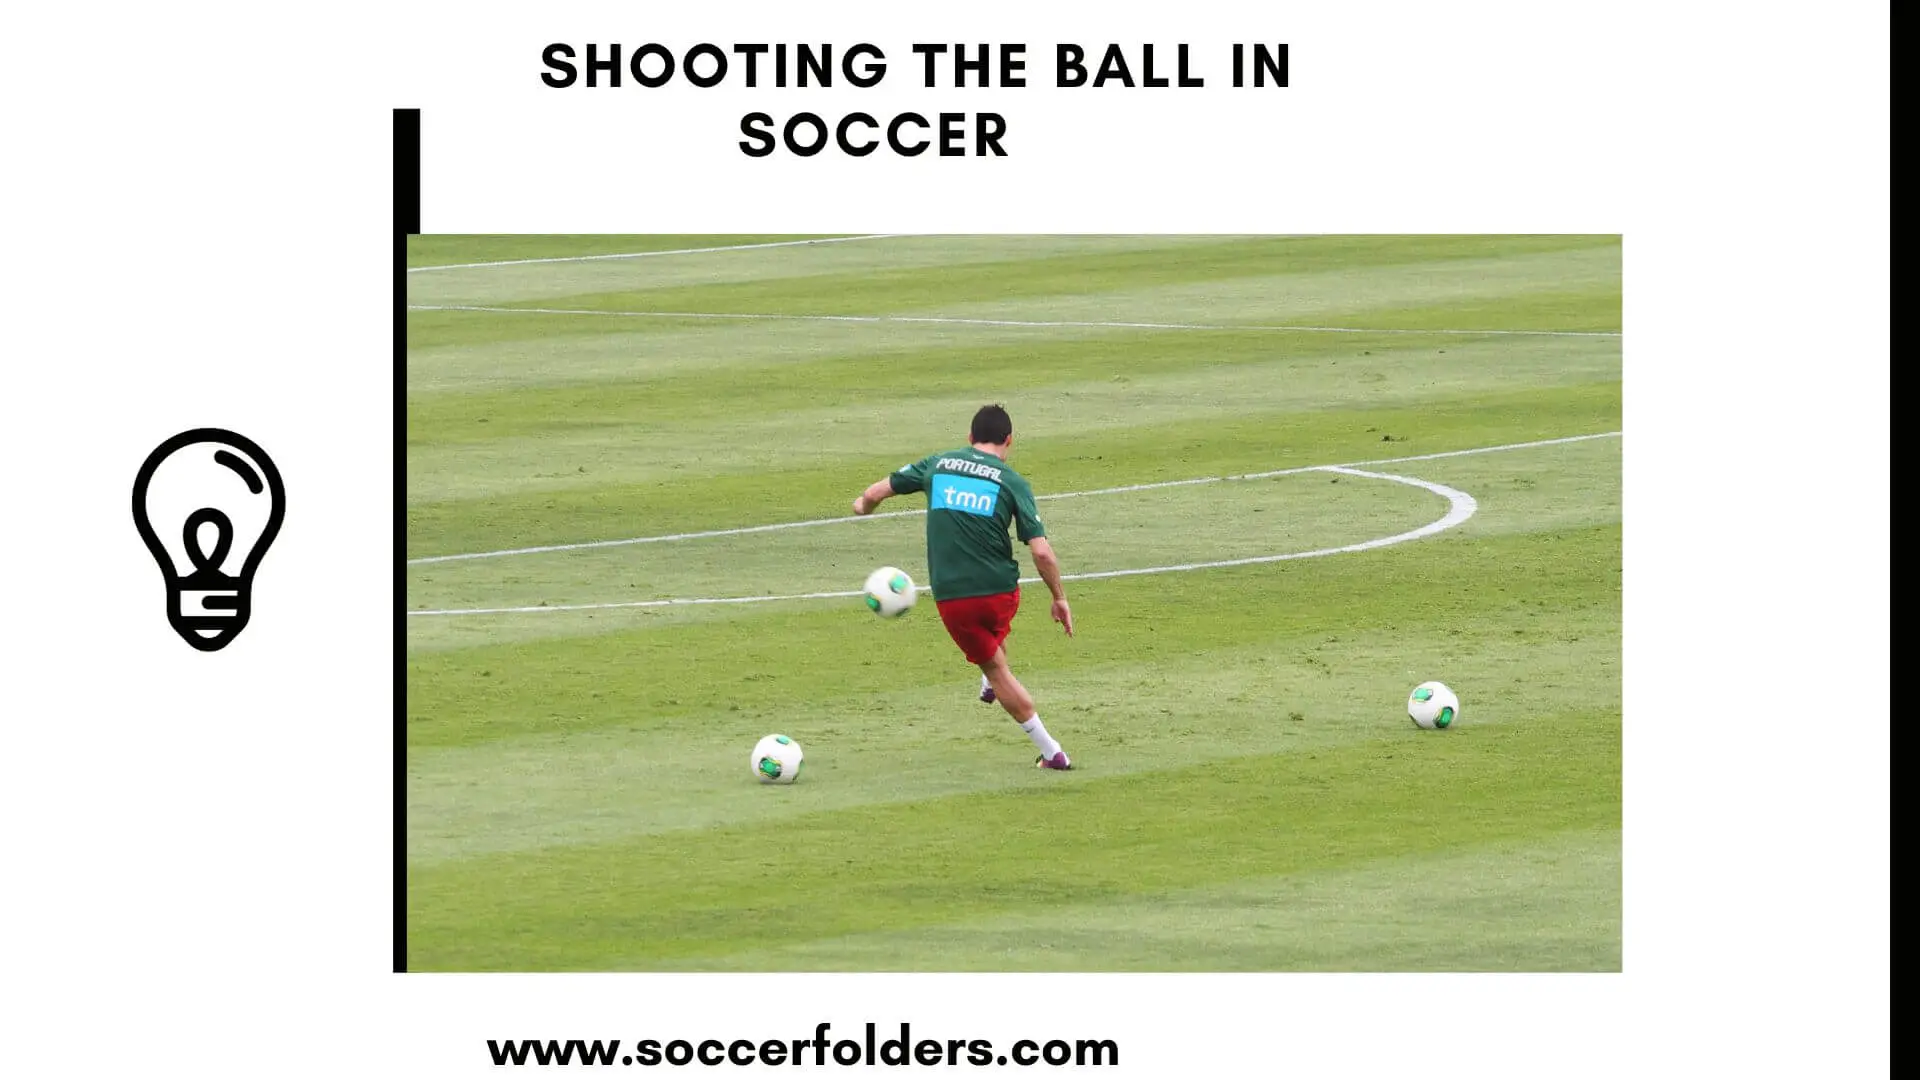 Shooting the ball in soccer - Featured image